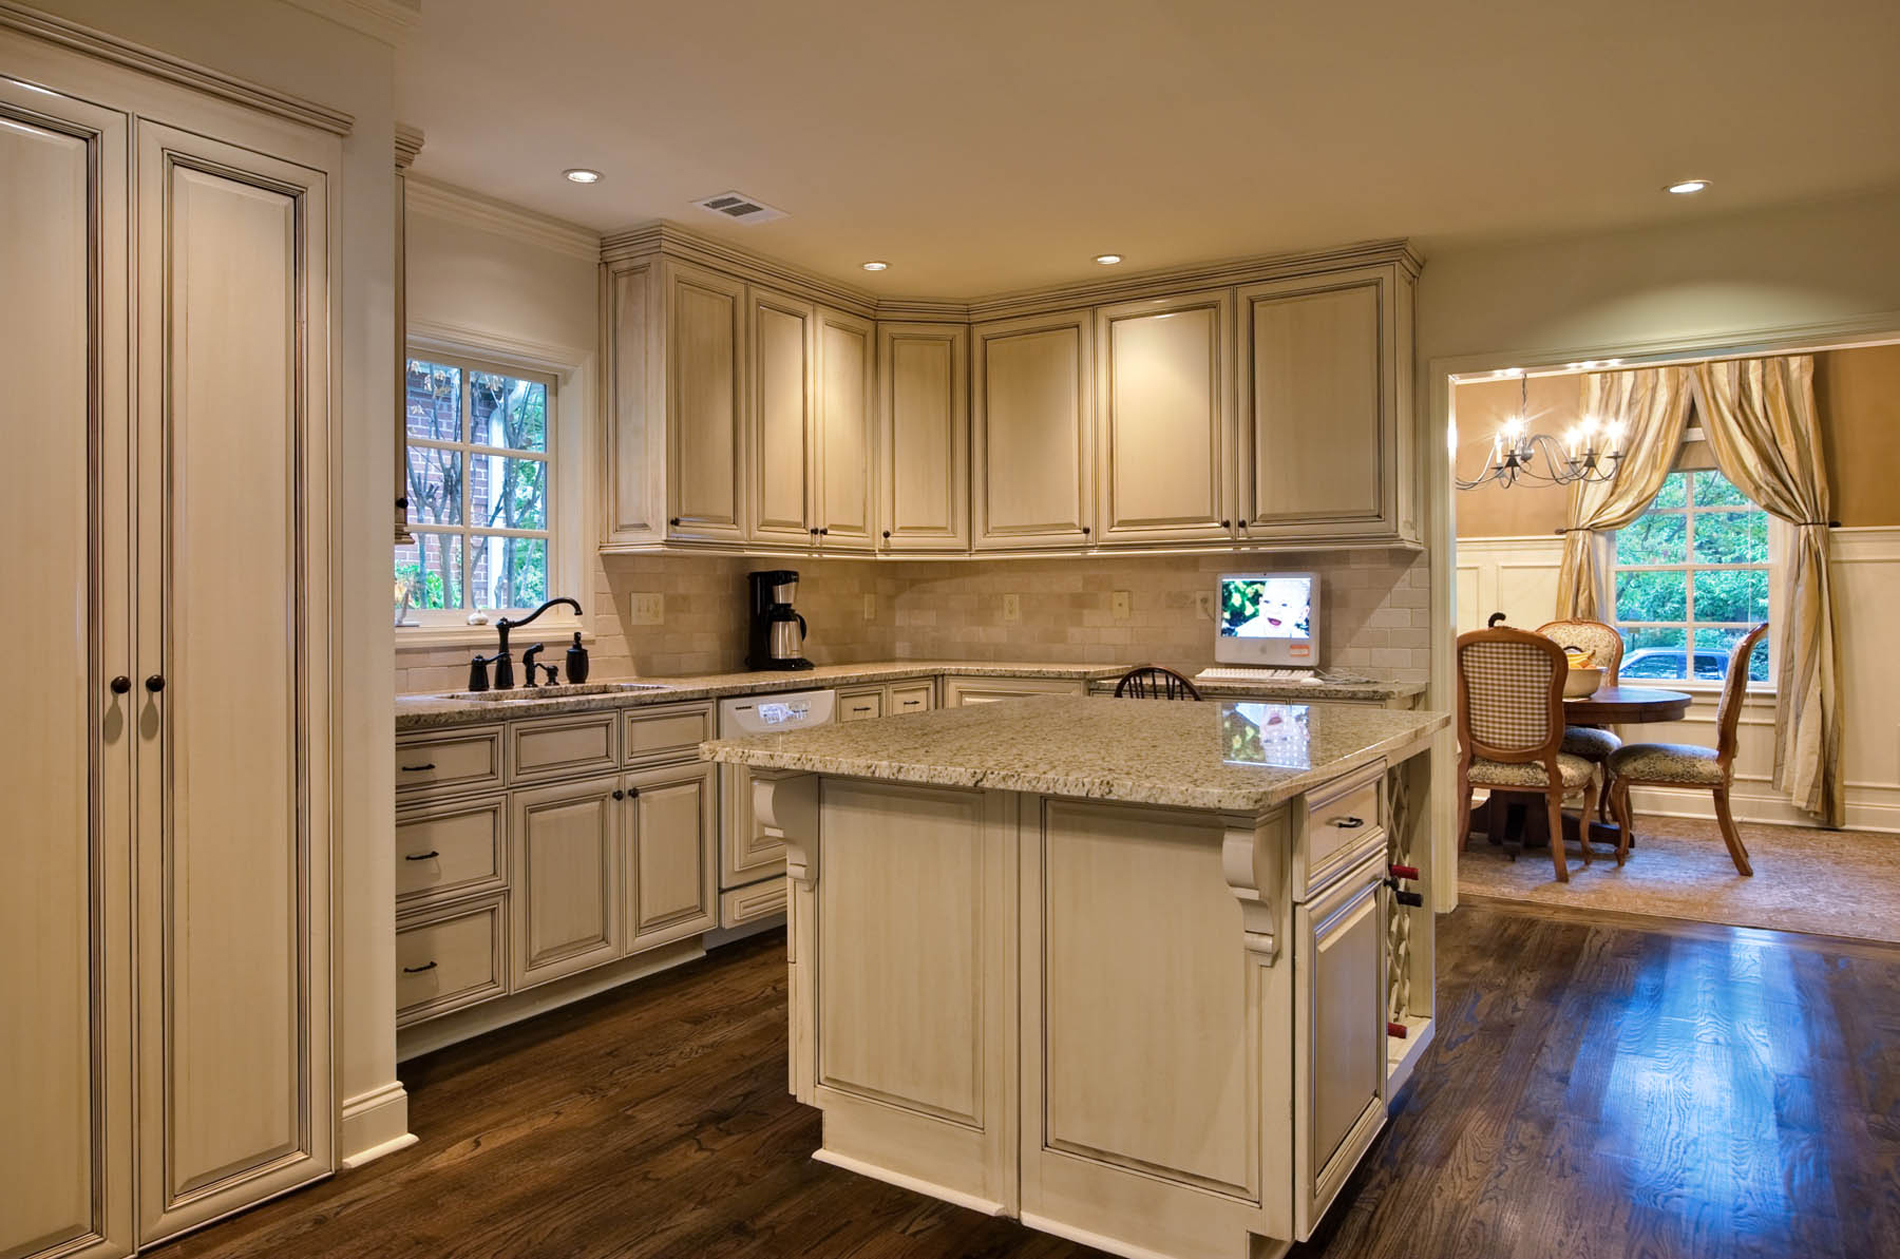 Appealing white granite tops wooden kitchen island with antique white